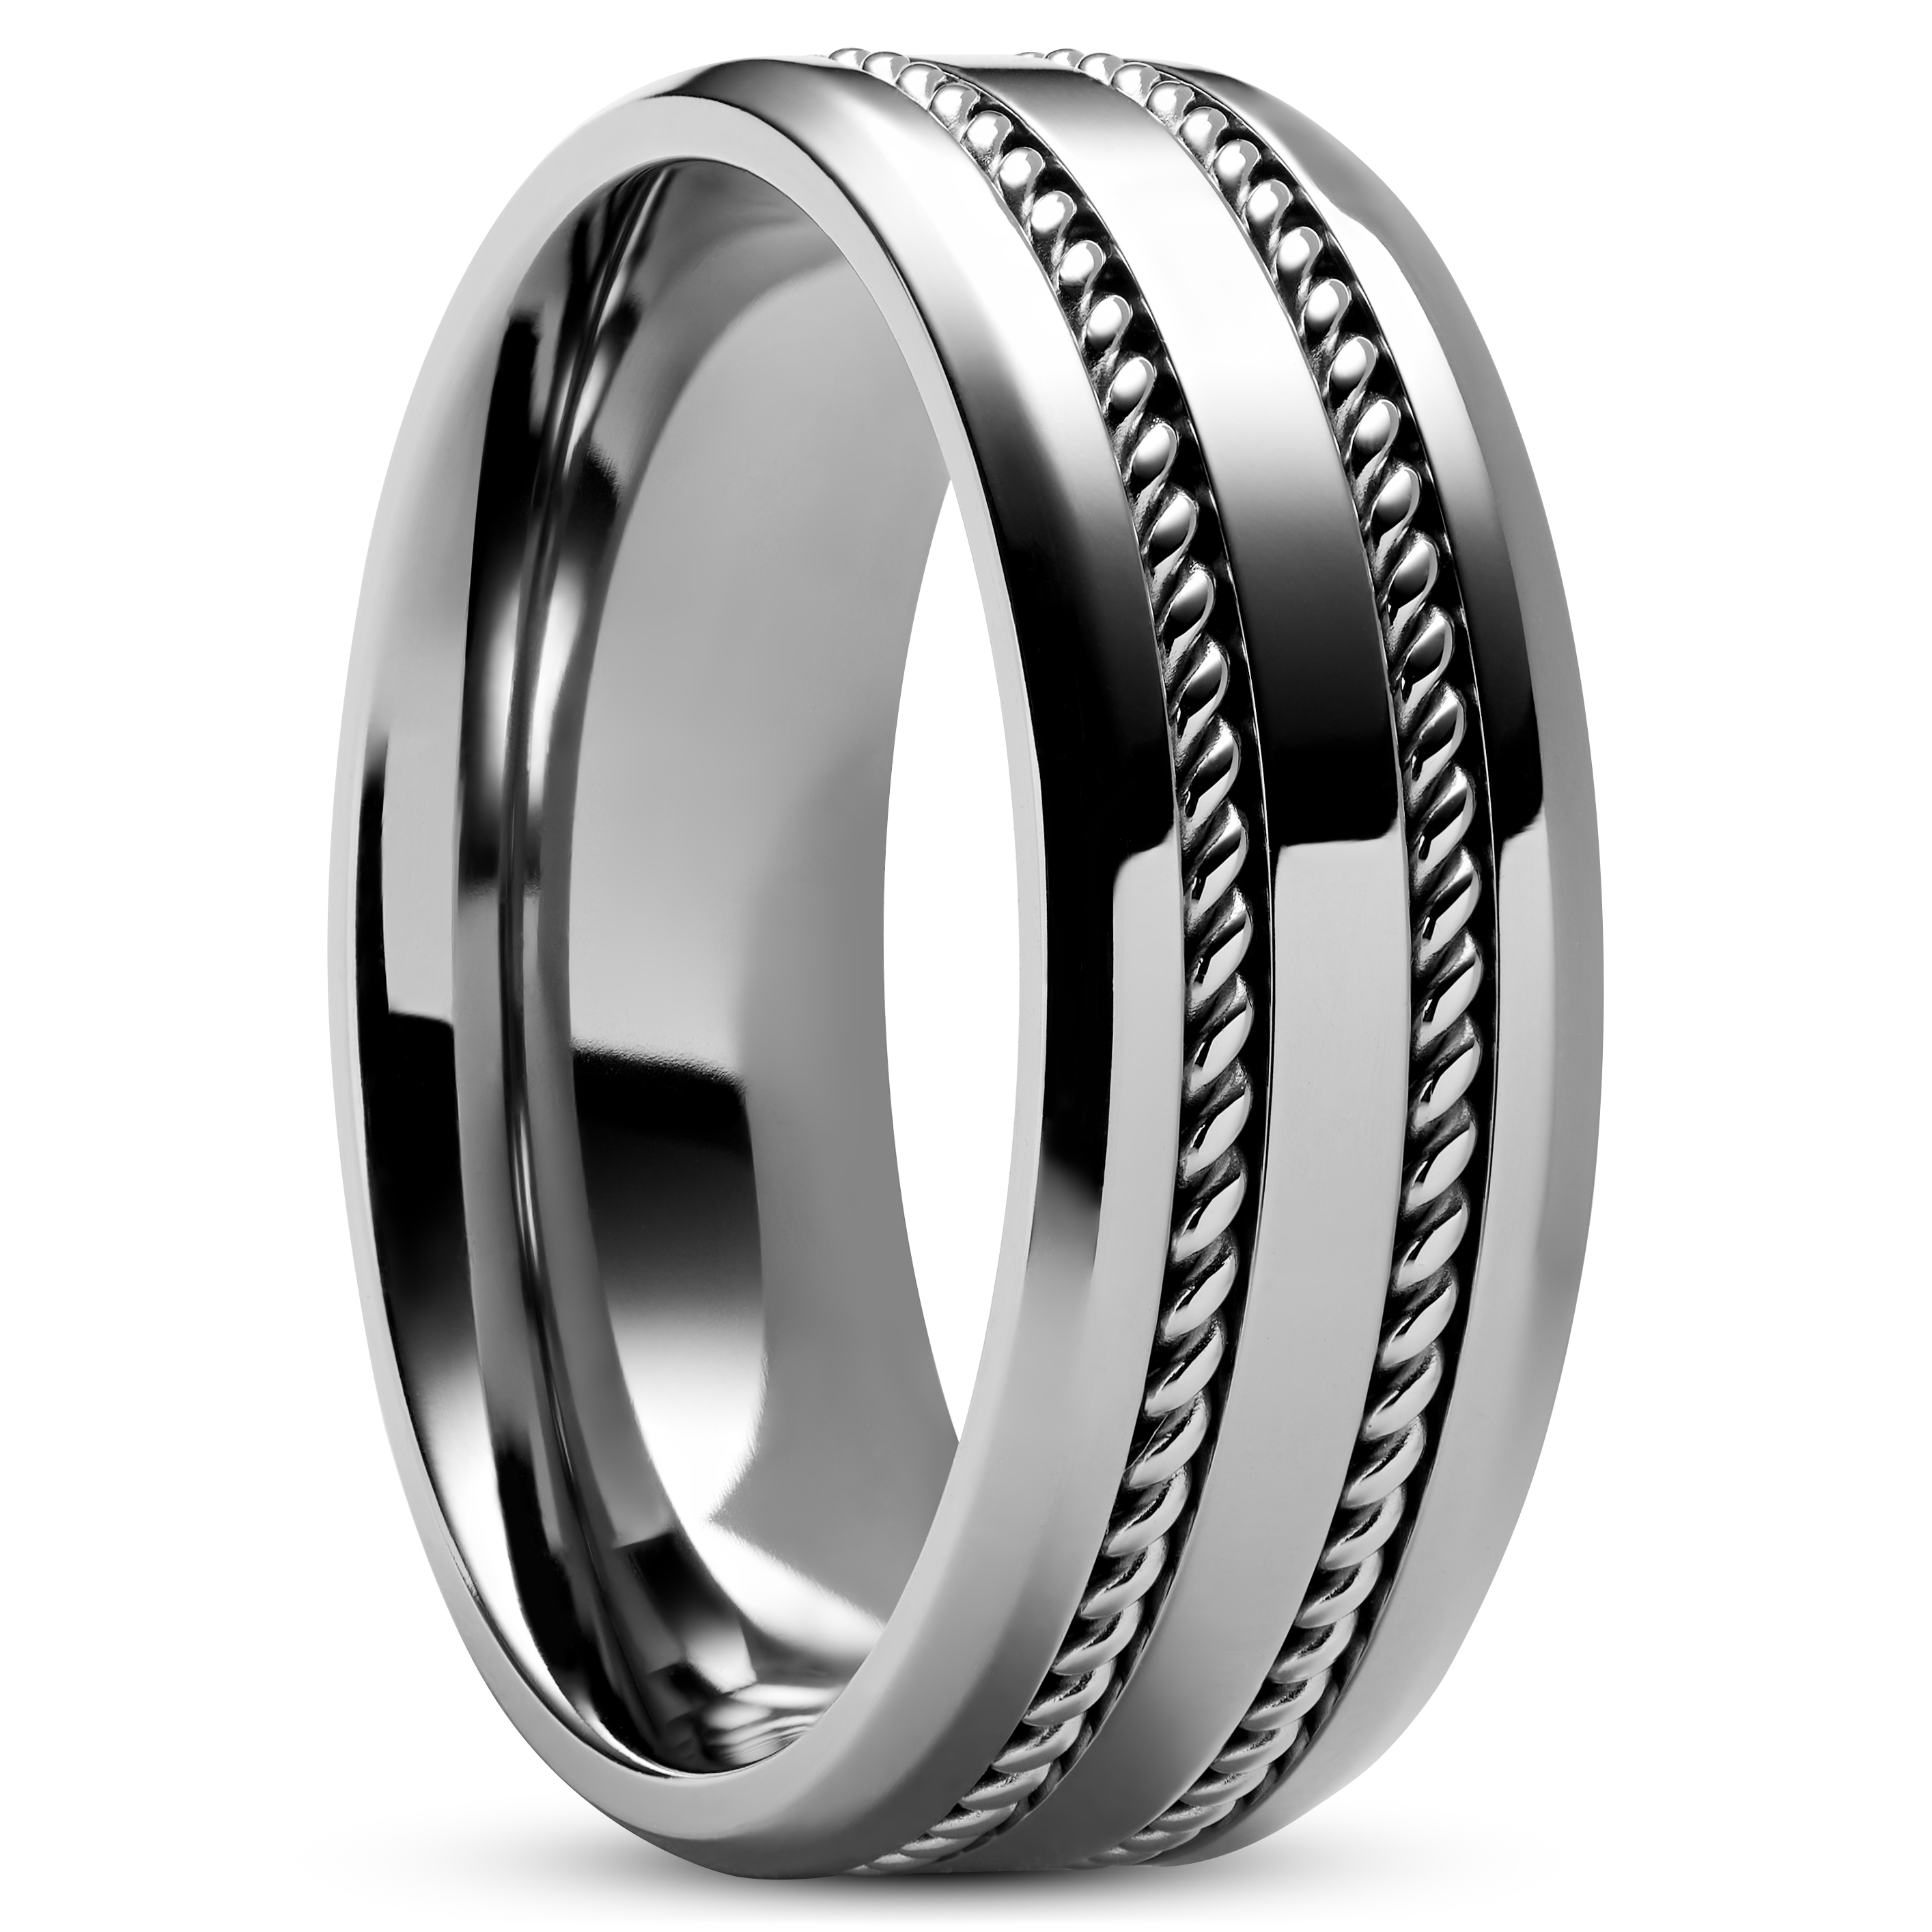 Buy THE MEN THING BLACK ENIGMA - Titanium Steel Vintage Ring with Black  Stone (Black Stone - 21) at Amazon.in